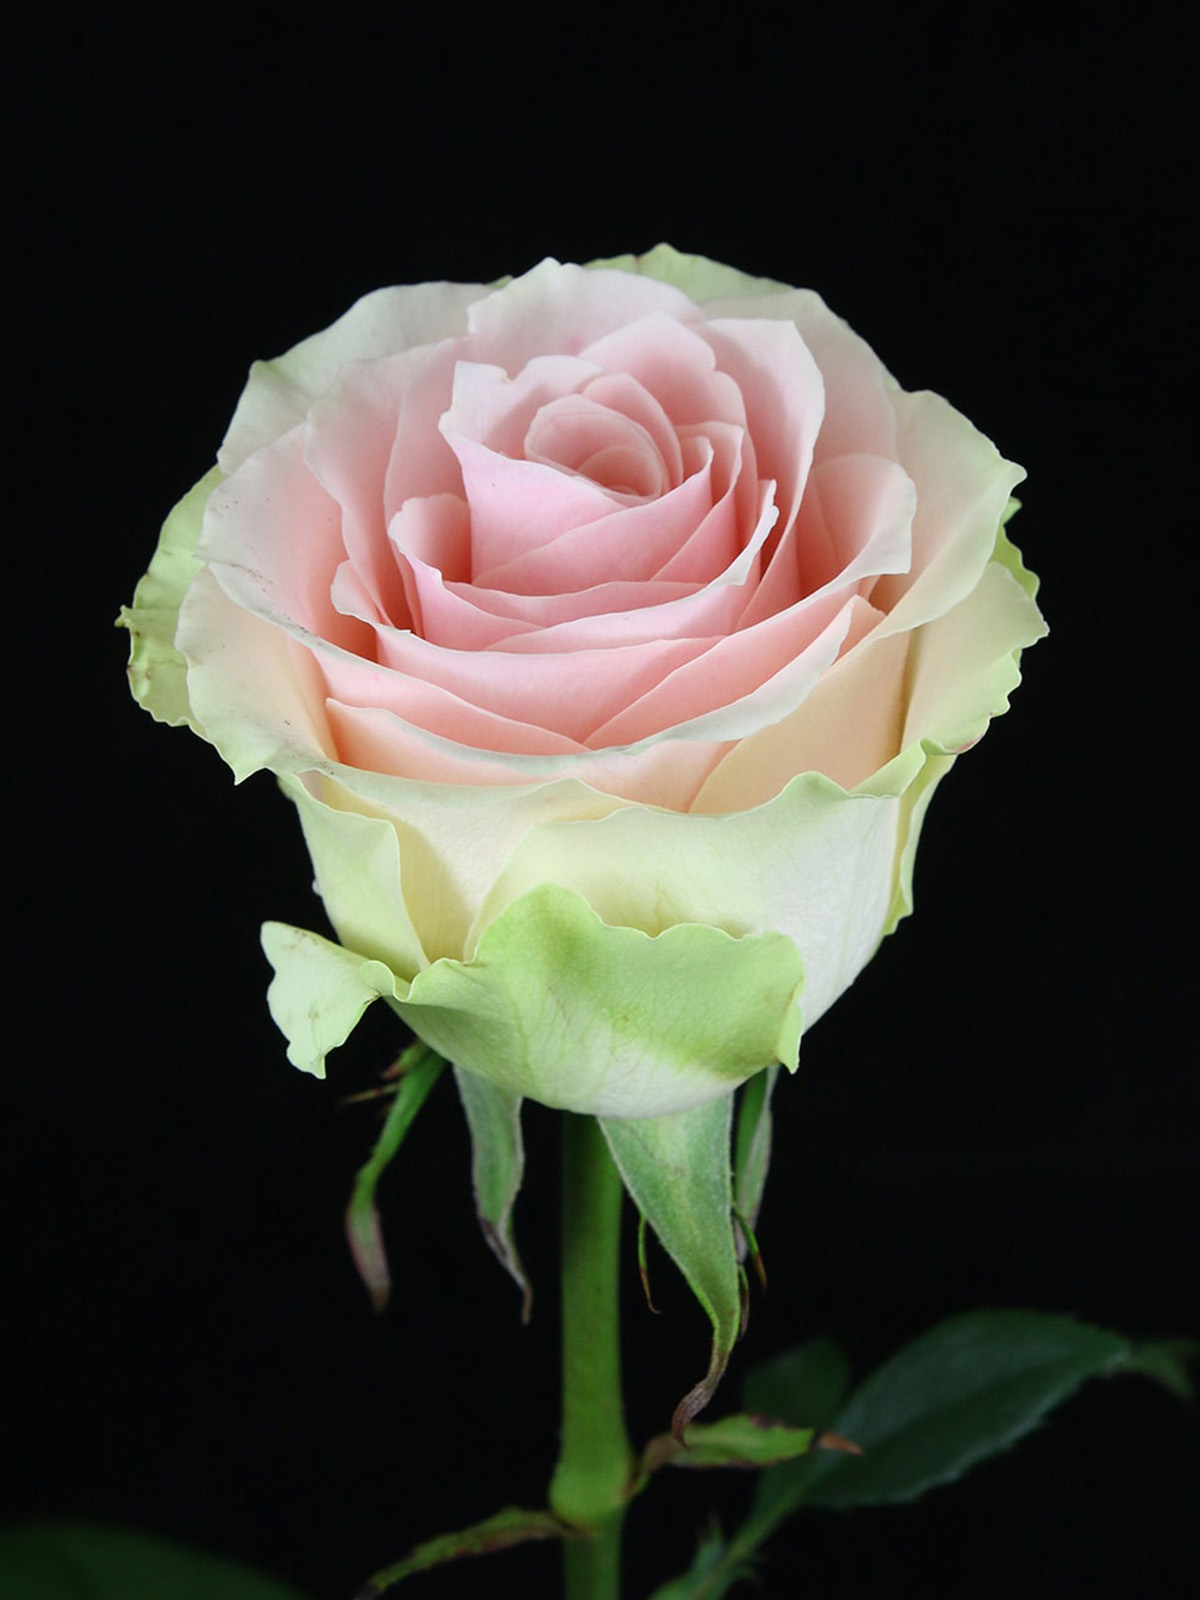 Rose Frutteto Is One of the Pink Roses from De Ruiter